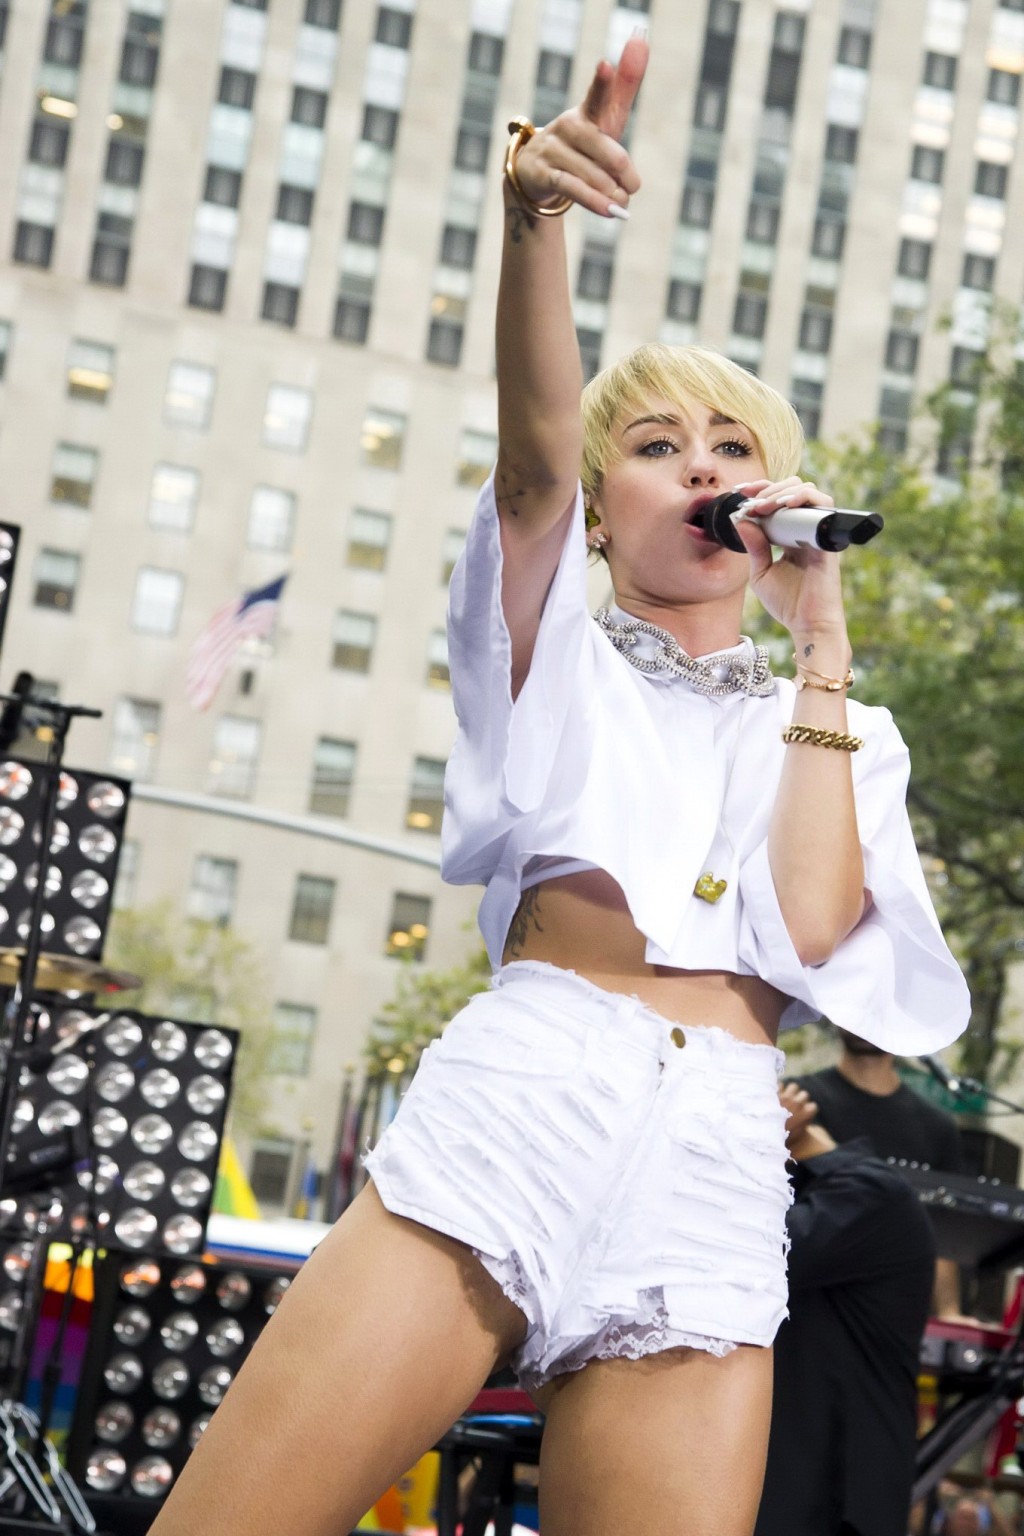 Miley Cyrus showing off her ass, legs and panties while performing in ripped hot #75216336